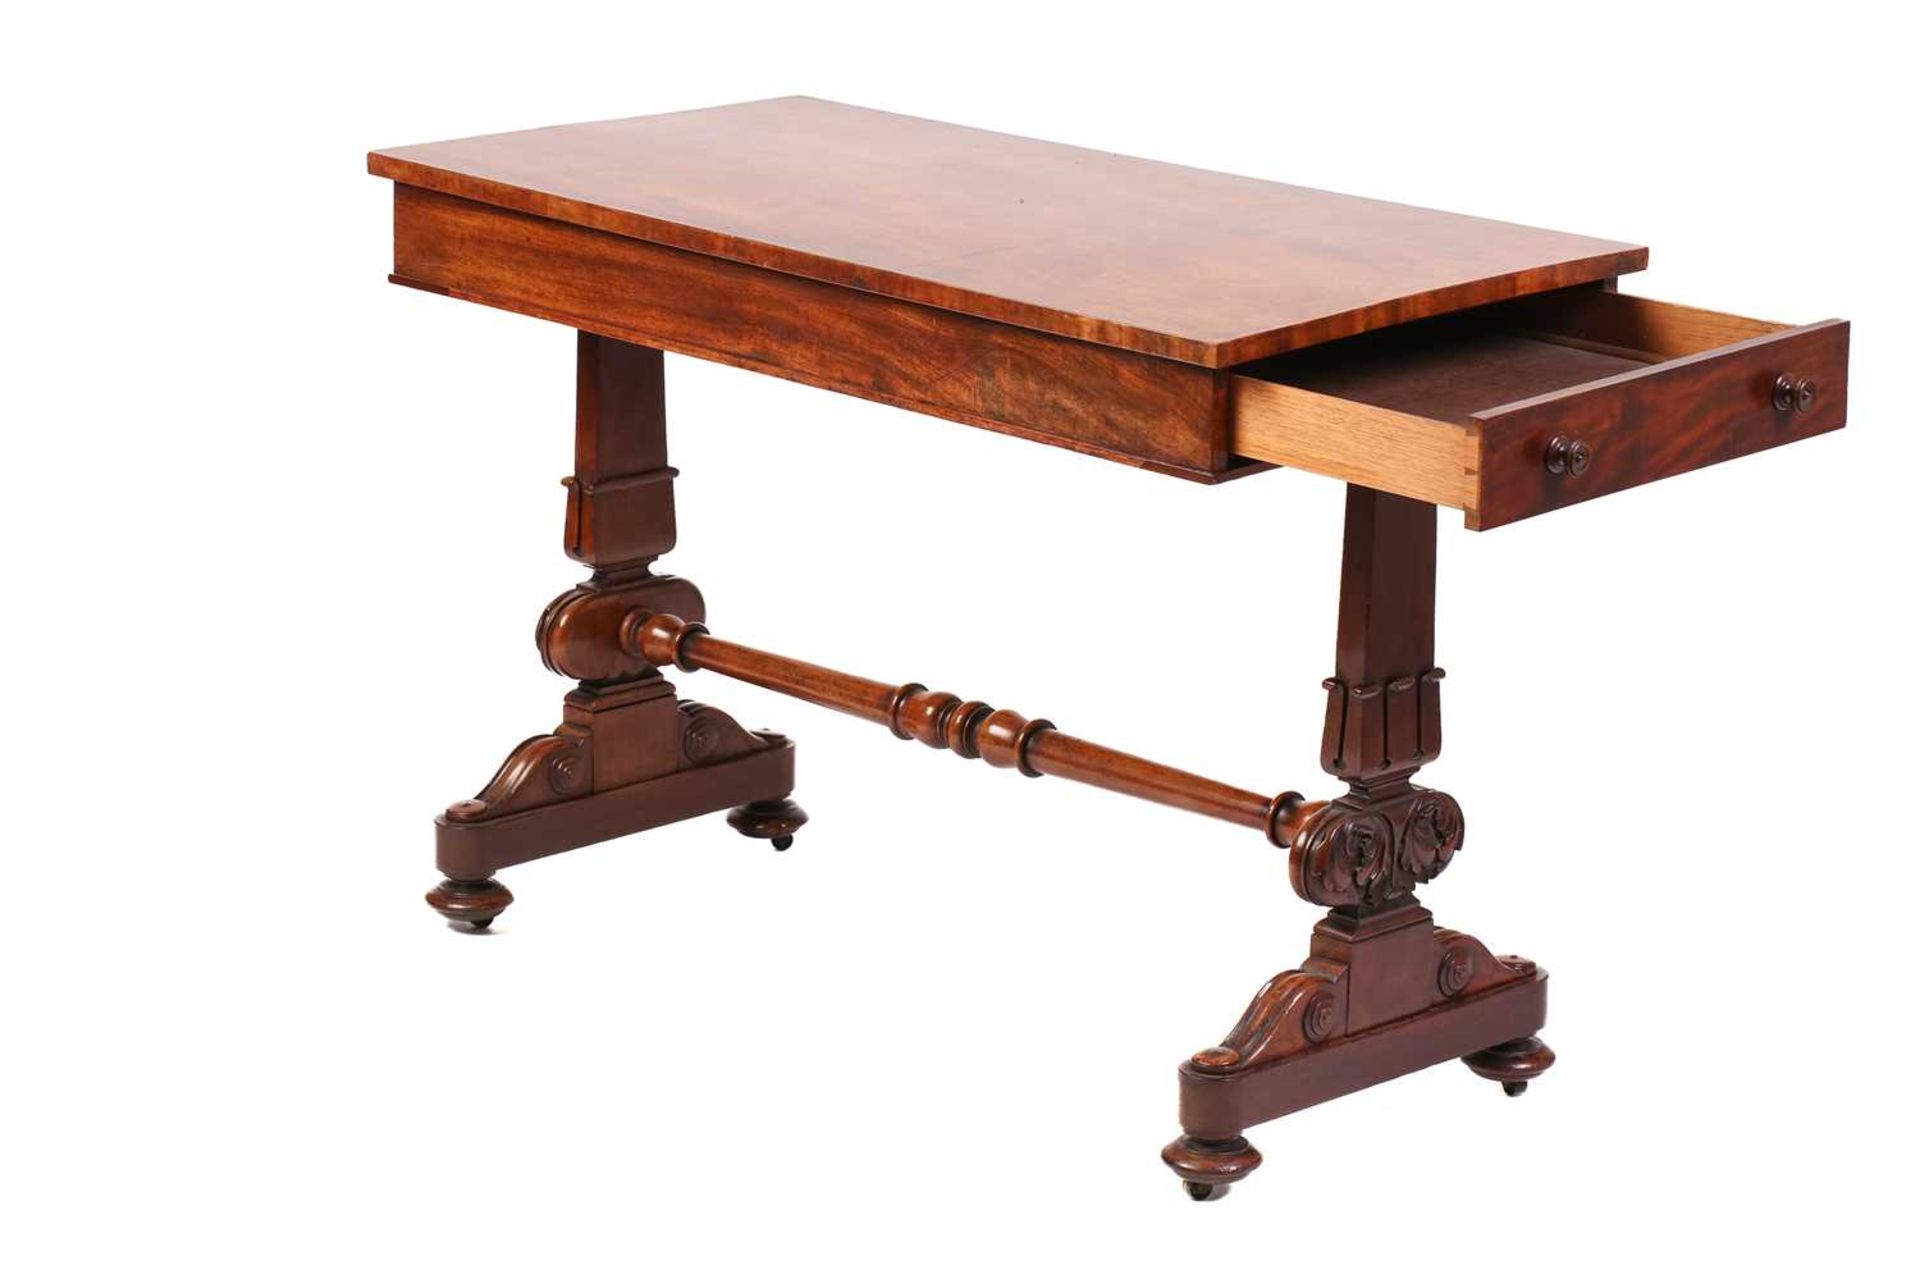 An early Victorian mahogany rectangular side table with unusually configured end frieze drawers on - Image 6 of 8